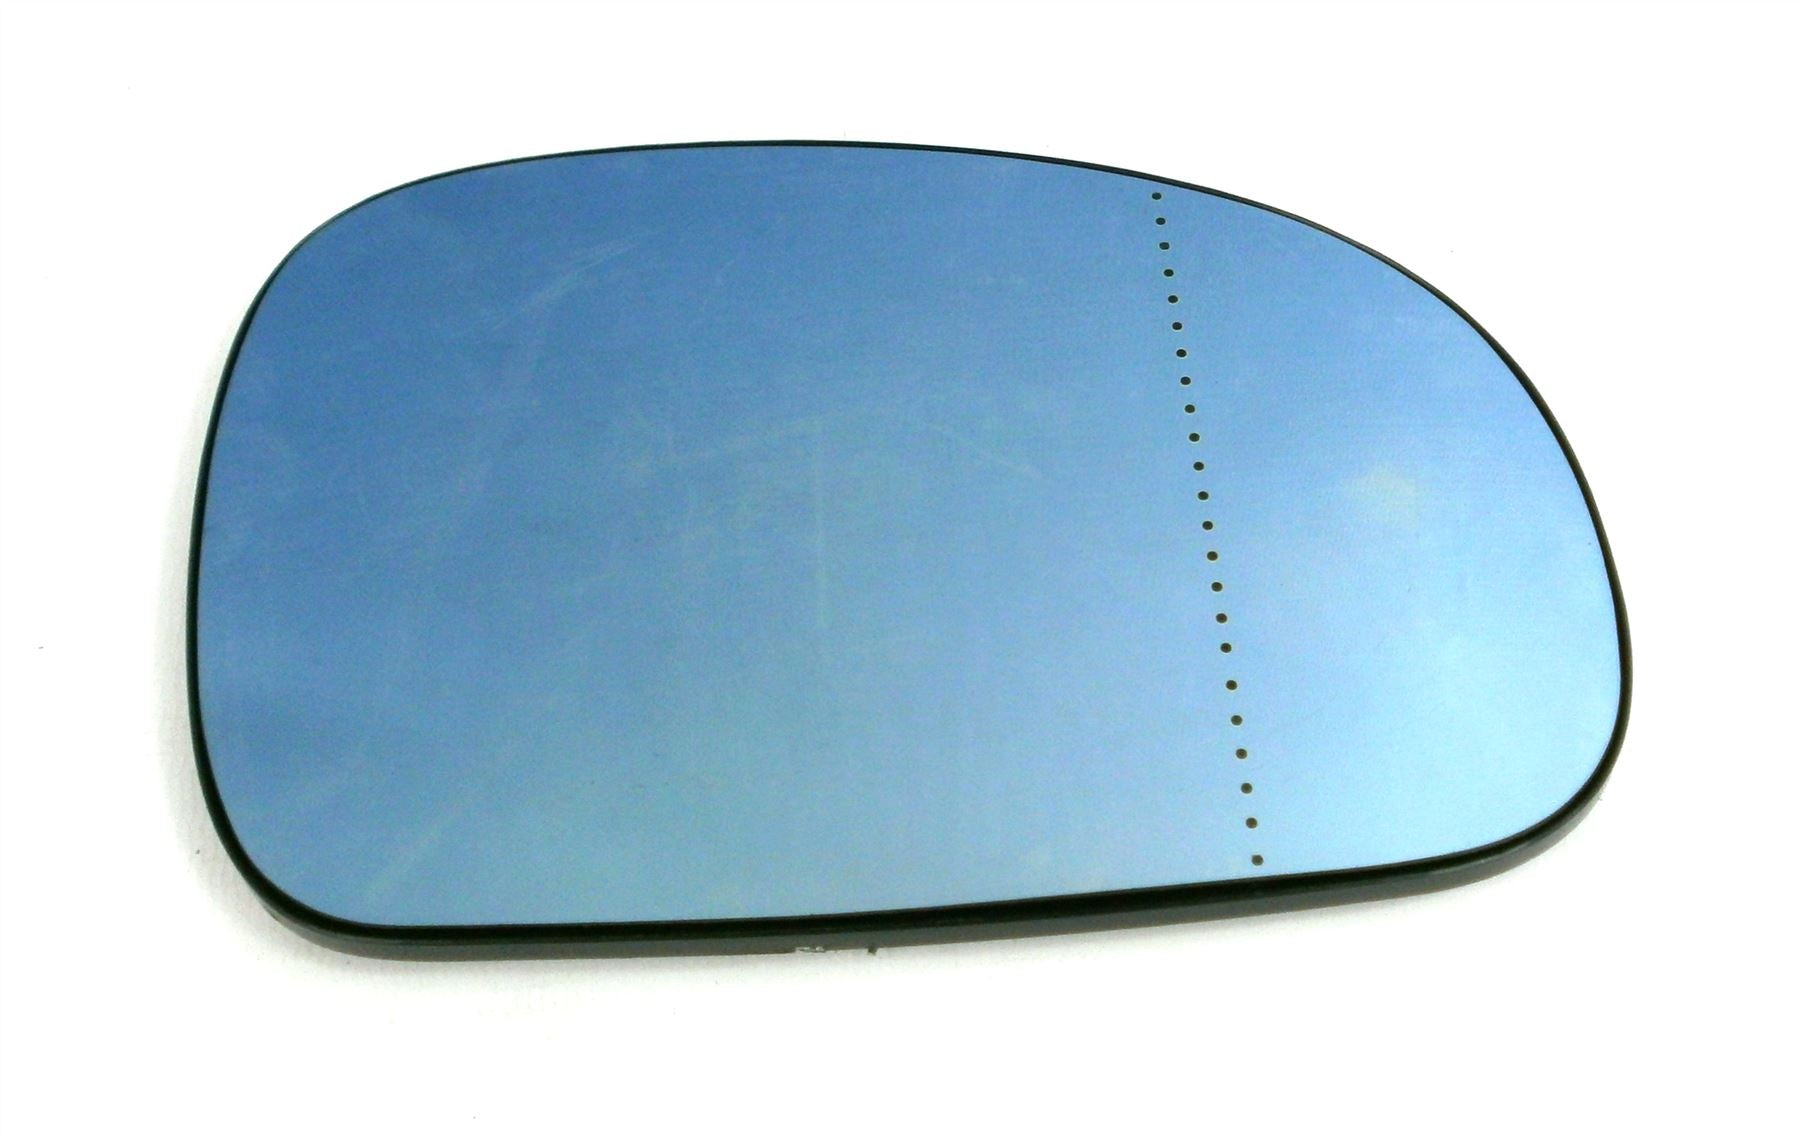 Peugeot 406 Mk.2 1999-2004 Heated Aspherical Blue Tinted Mirror Glass Drivers Side O/S